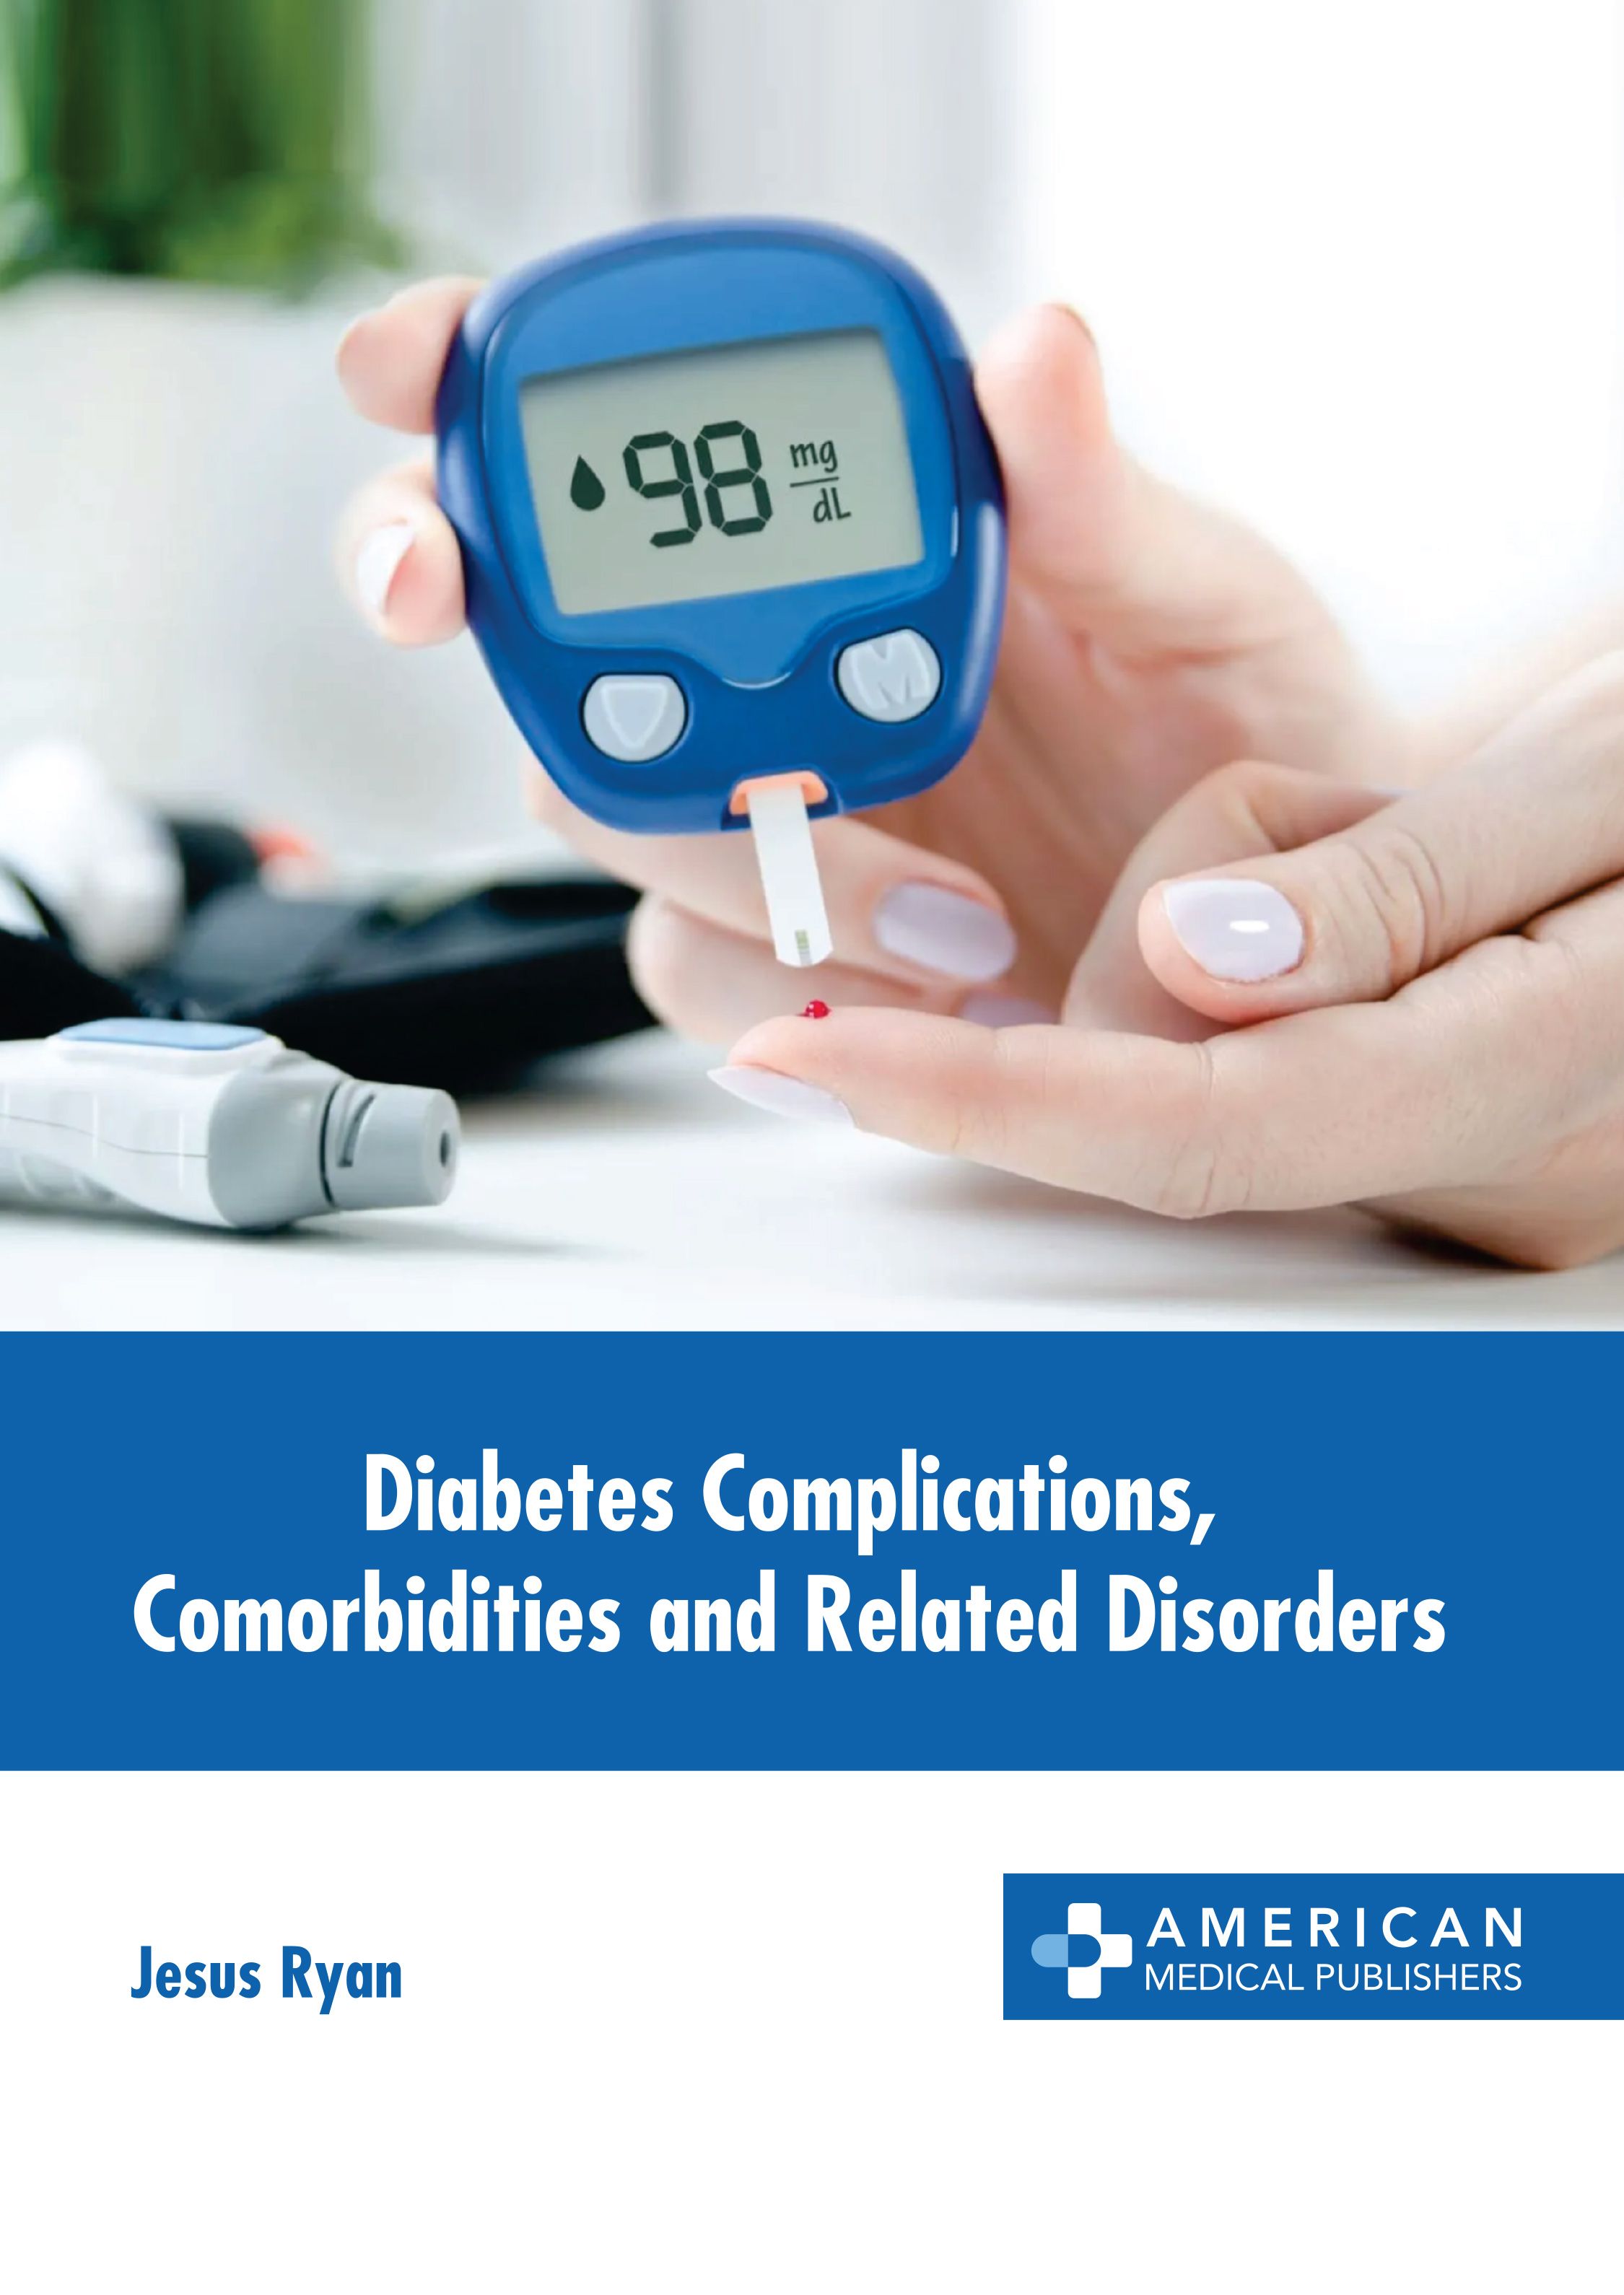 

exclusive-publishers/american-medical-publishers/diabetes-complications-comorbidities-and-related-disorders-9781639276561